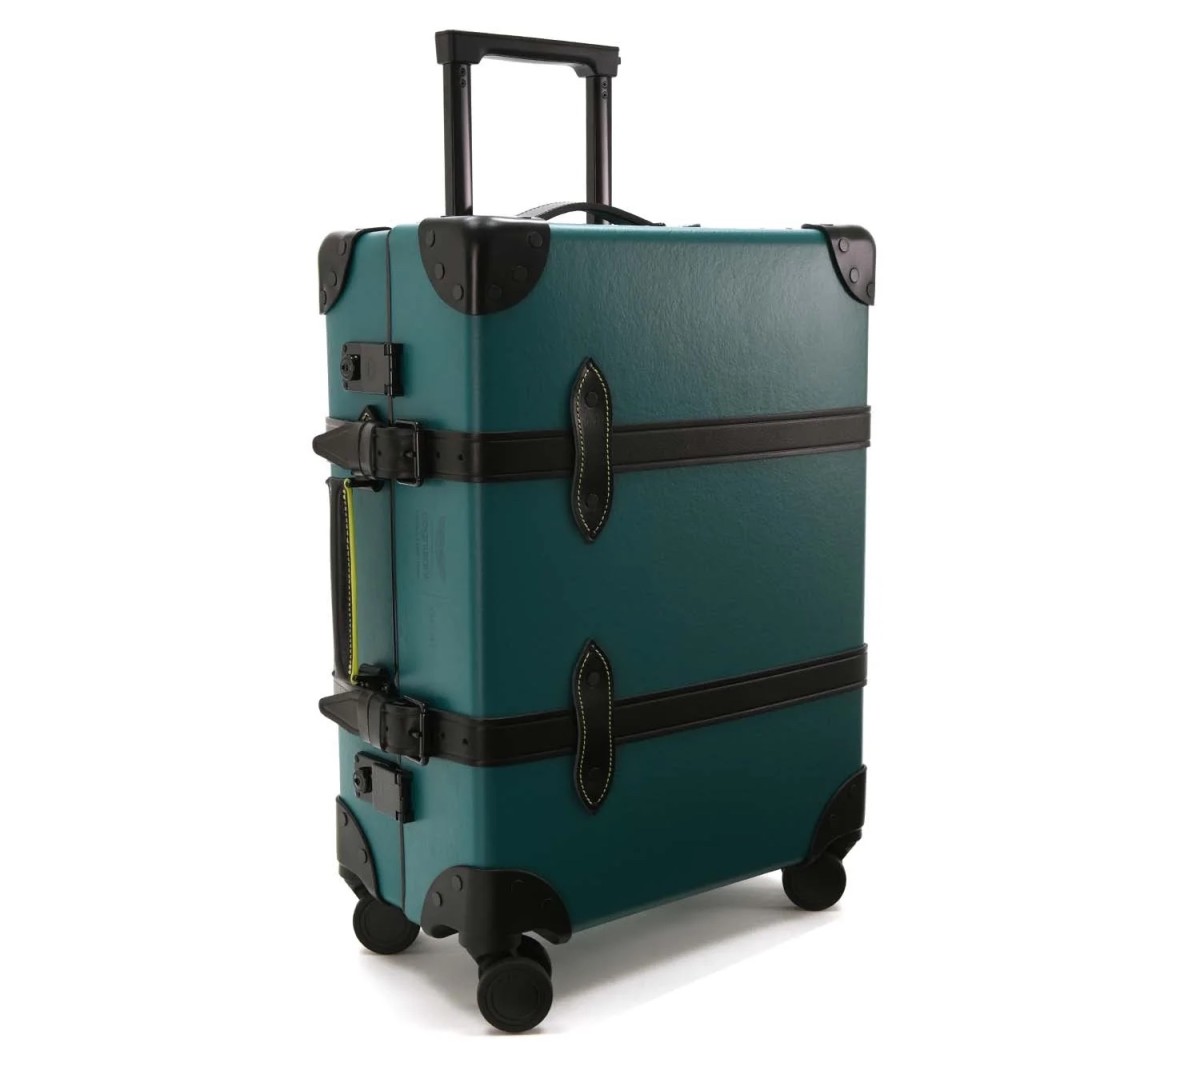 Globe-Trotter releases an F1-inspired luggage collection with Aston ...